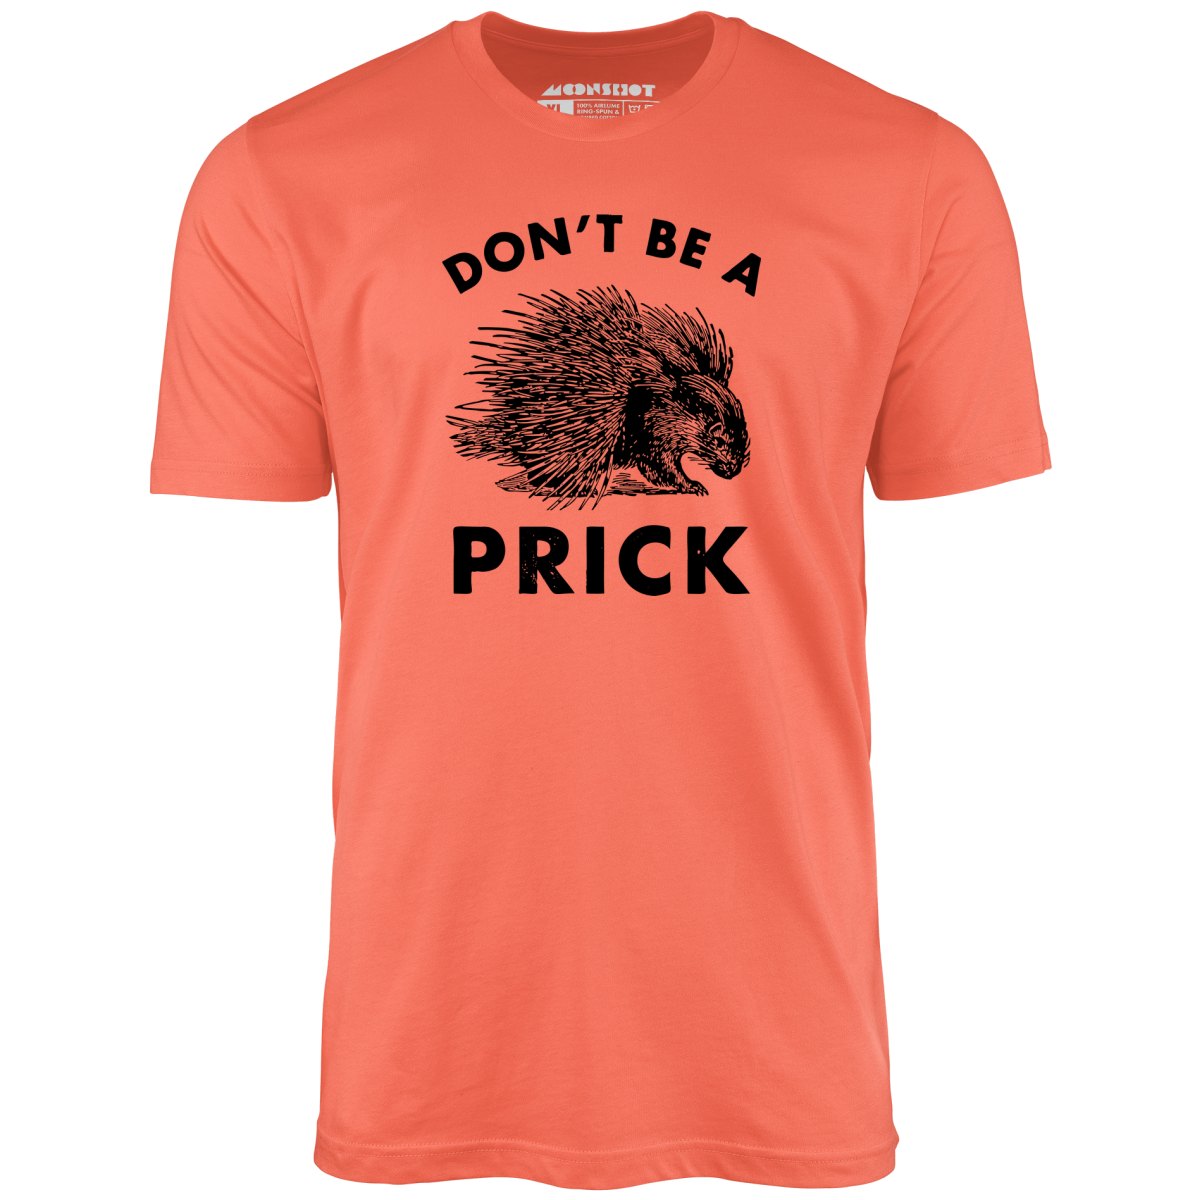 Don't Be a Prick - Unisex T-Shirt